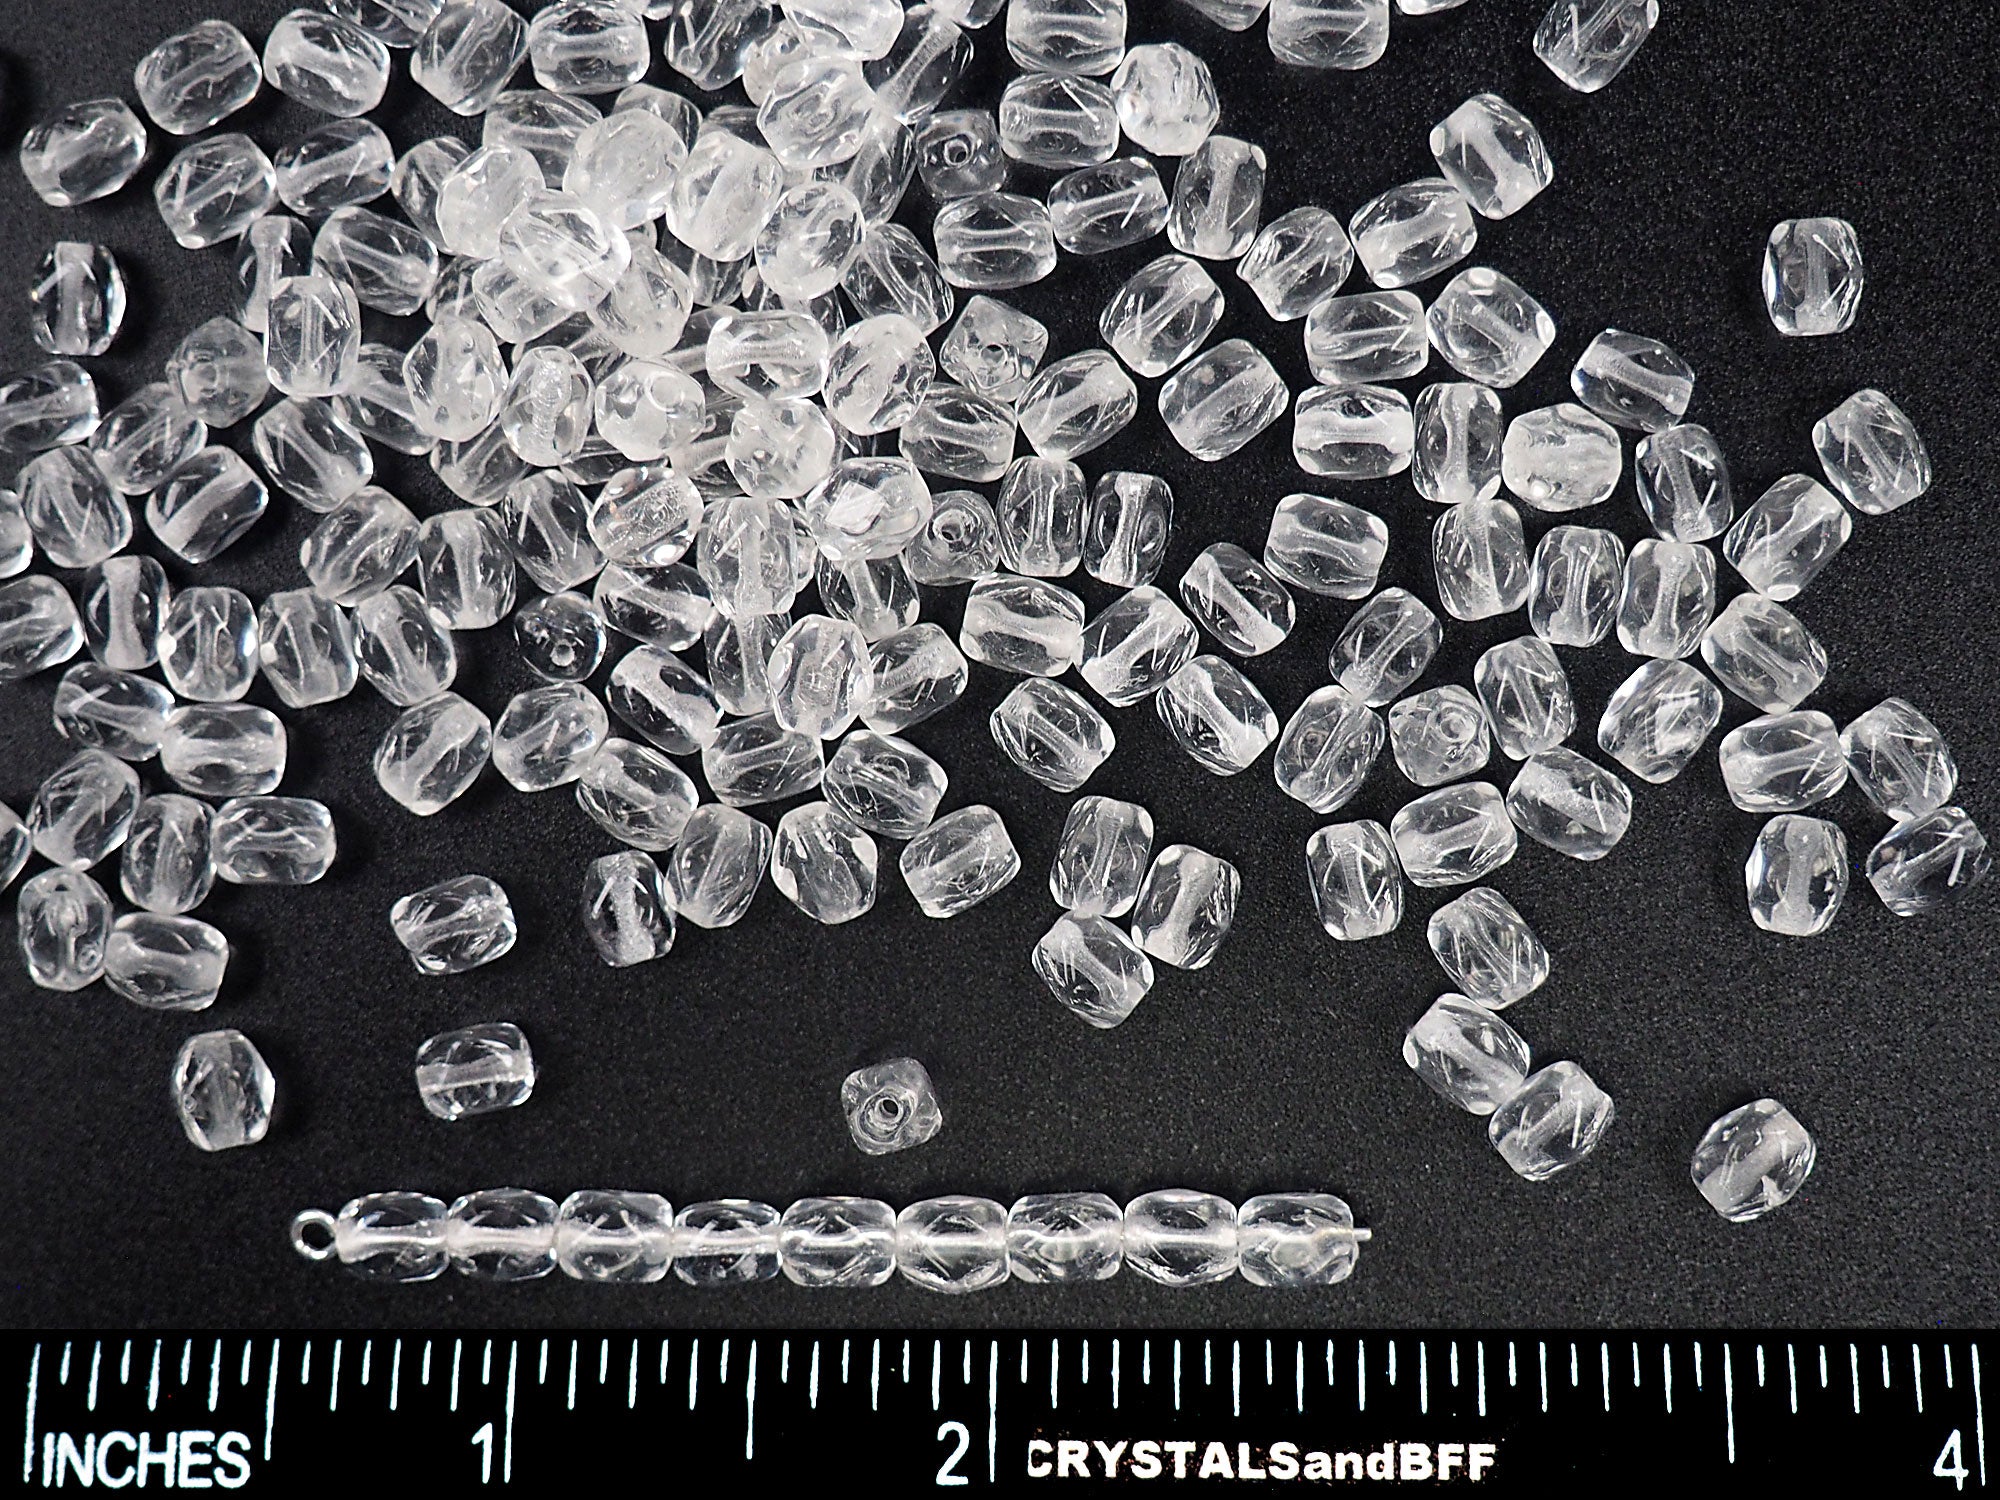 Czech Glass Druk Beads in size 6x5mm, Faceted, Clear Crystal, 50pcs, P893